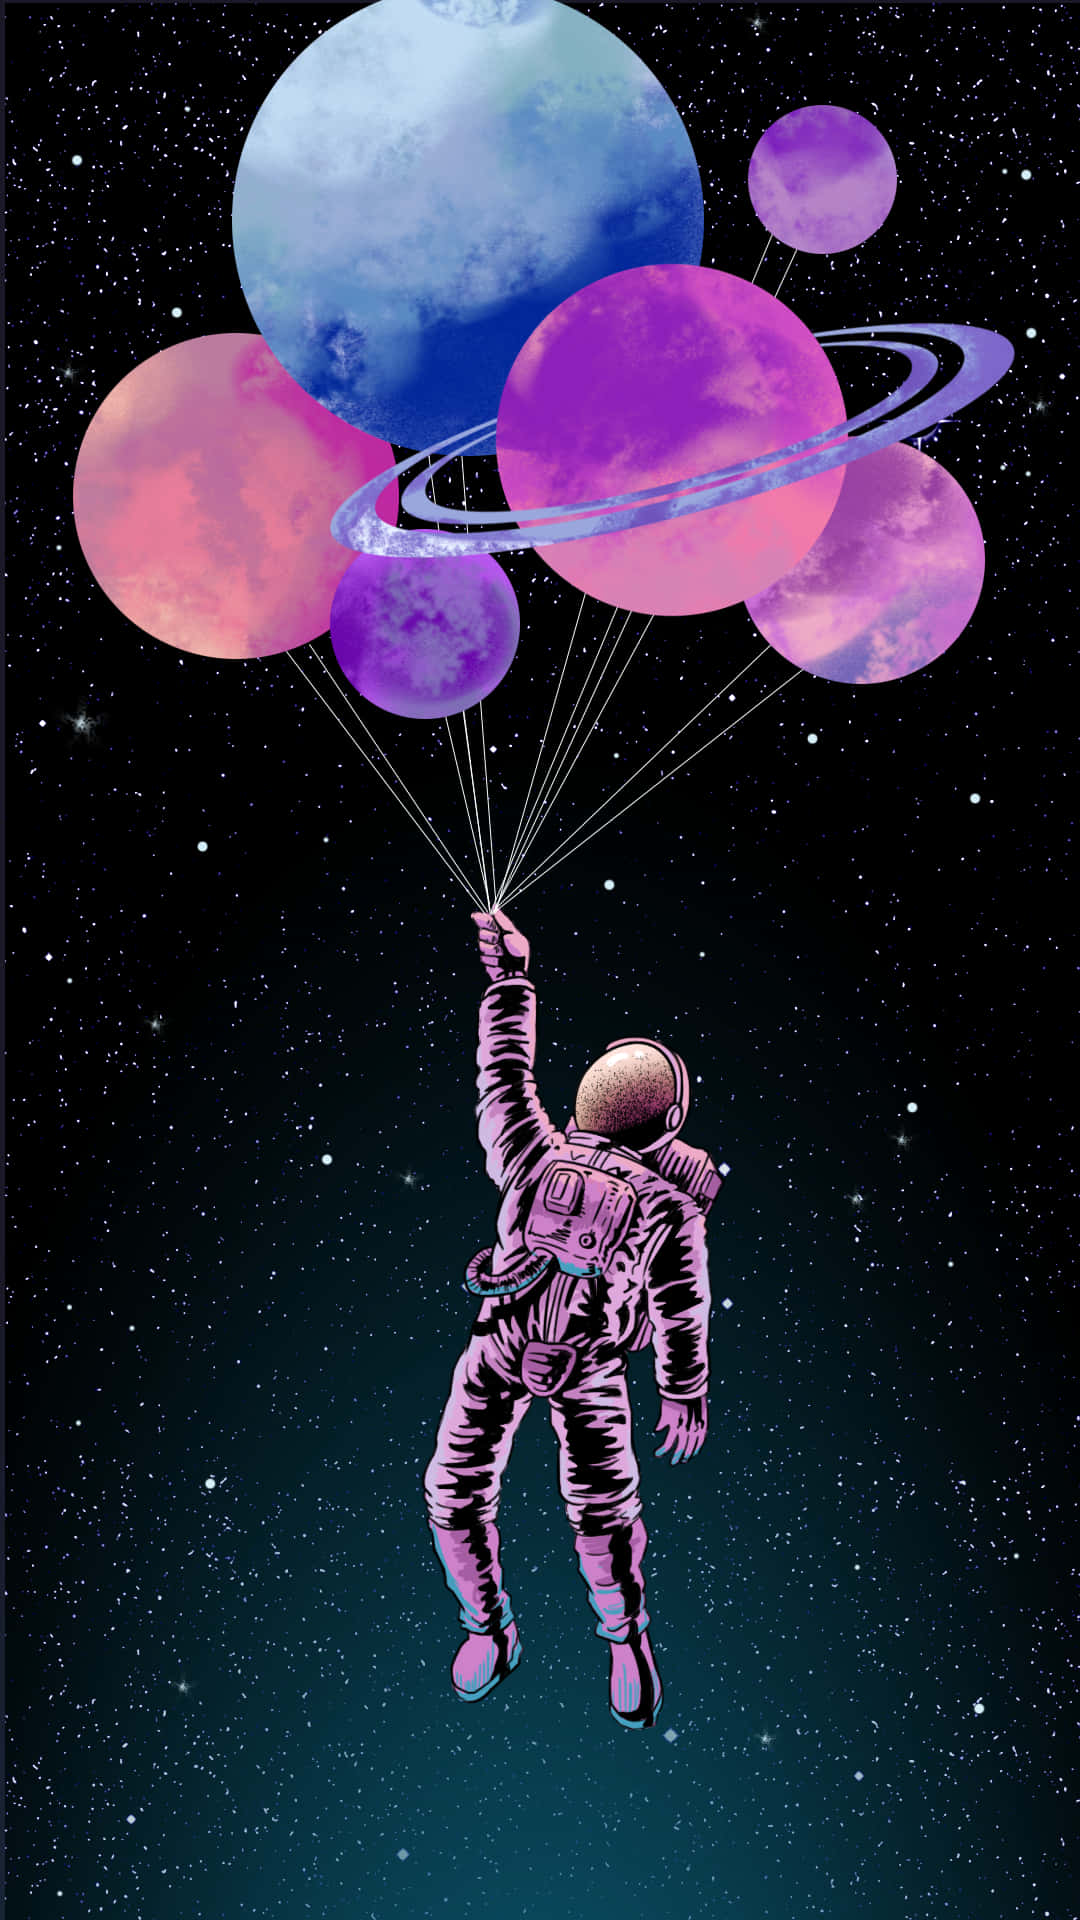 An Astronaut Is Flying With Balloons In Space